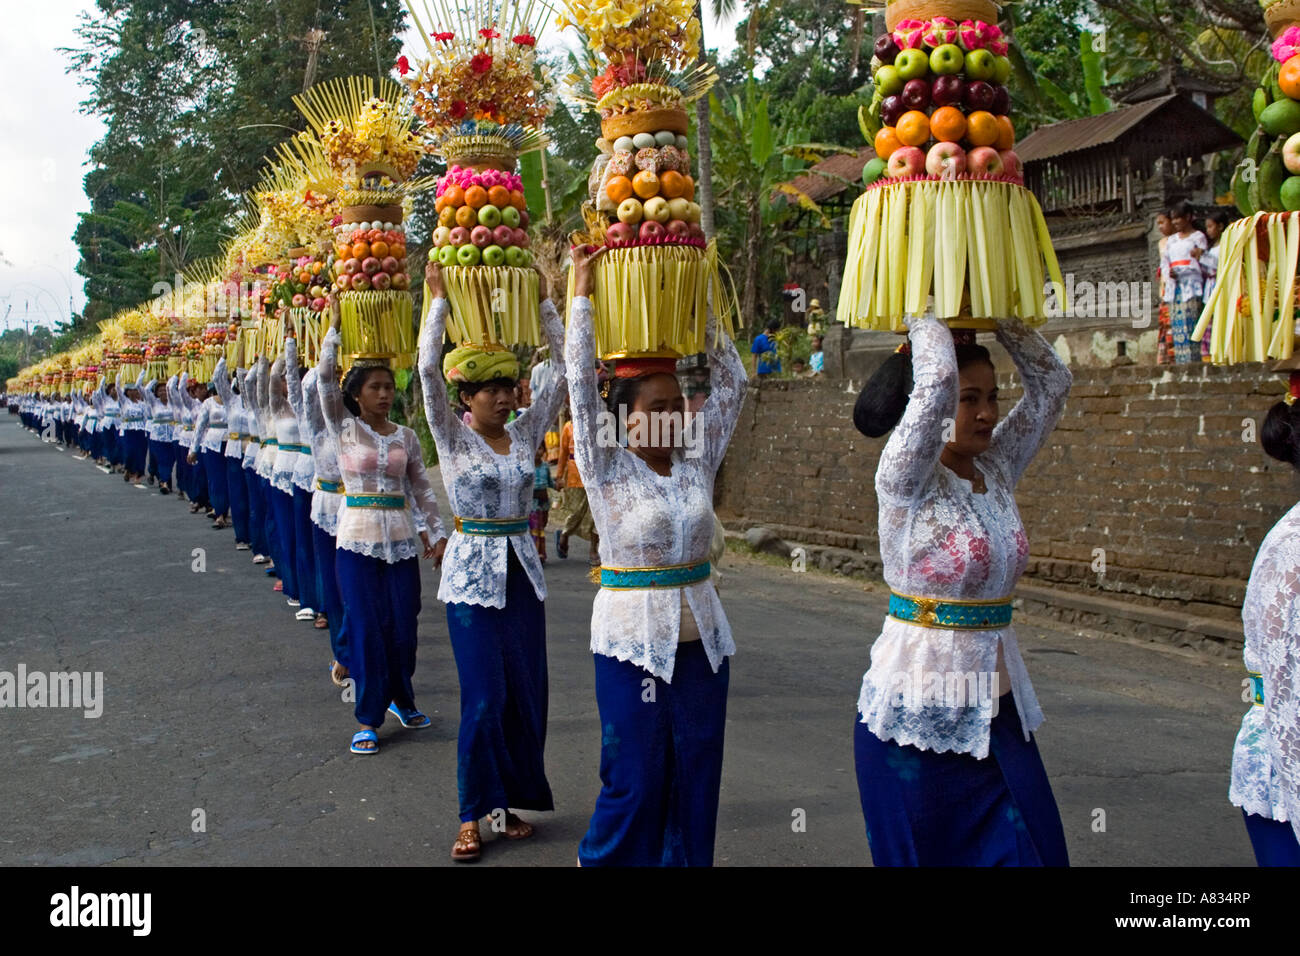 A seemingly endless precession of women, with a fruit offering, line up to enter a temple in Bali, Indonesia. Stock Photo